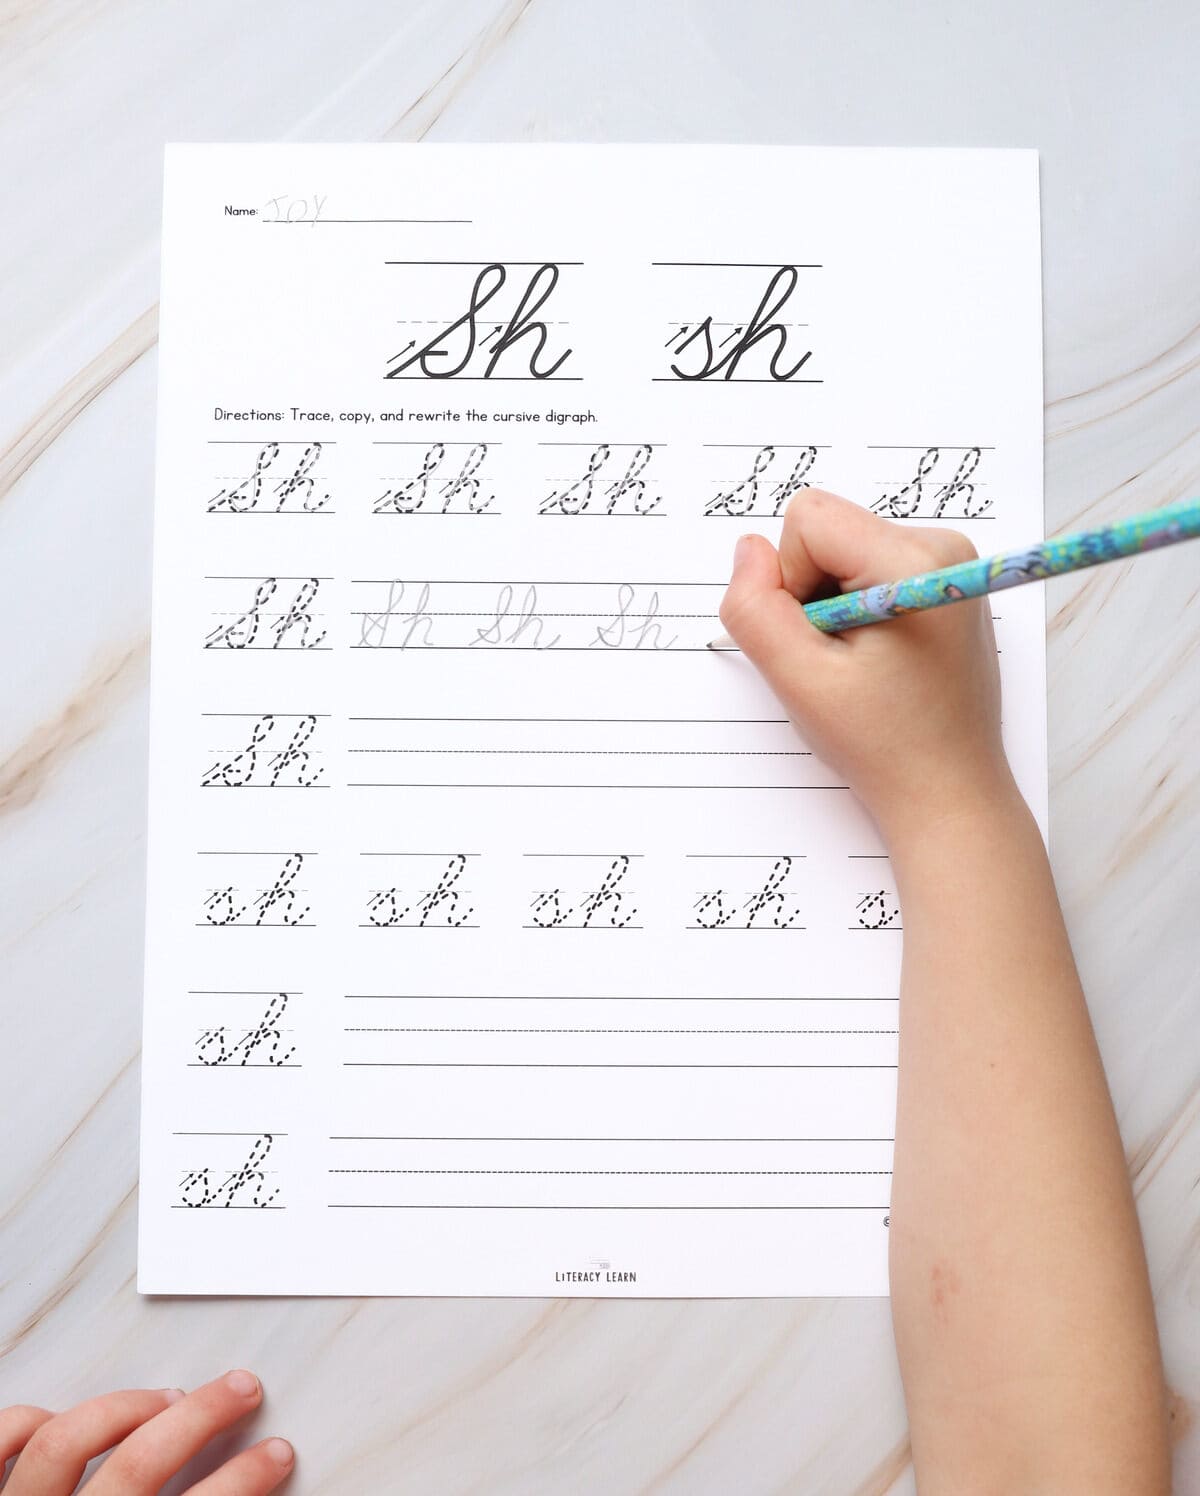 A printed digraph sh cursive writing worksheet with a child tracing then writing the letters.